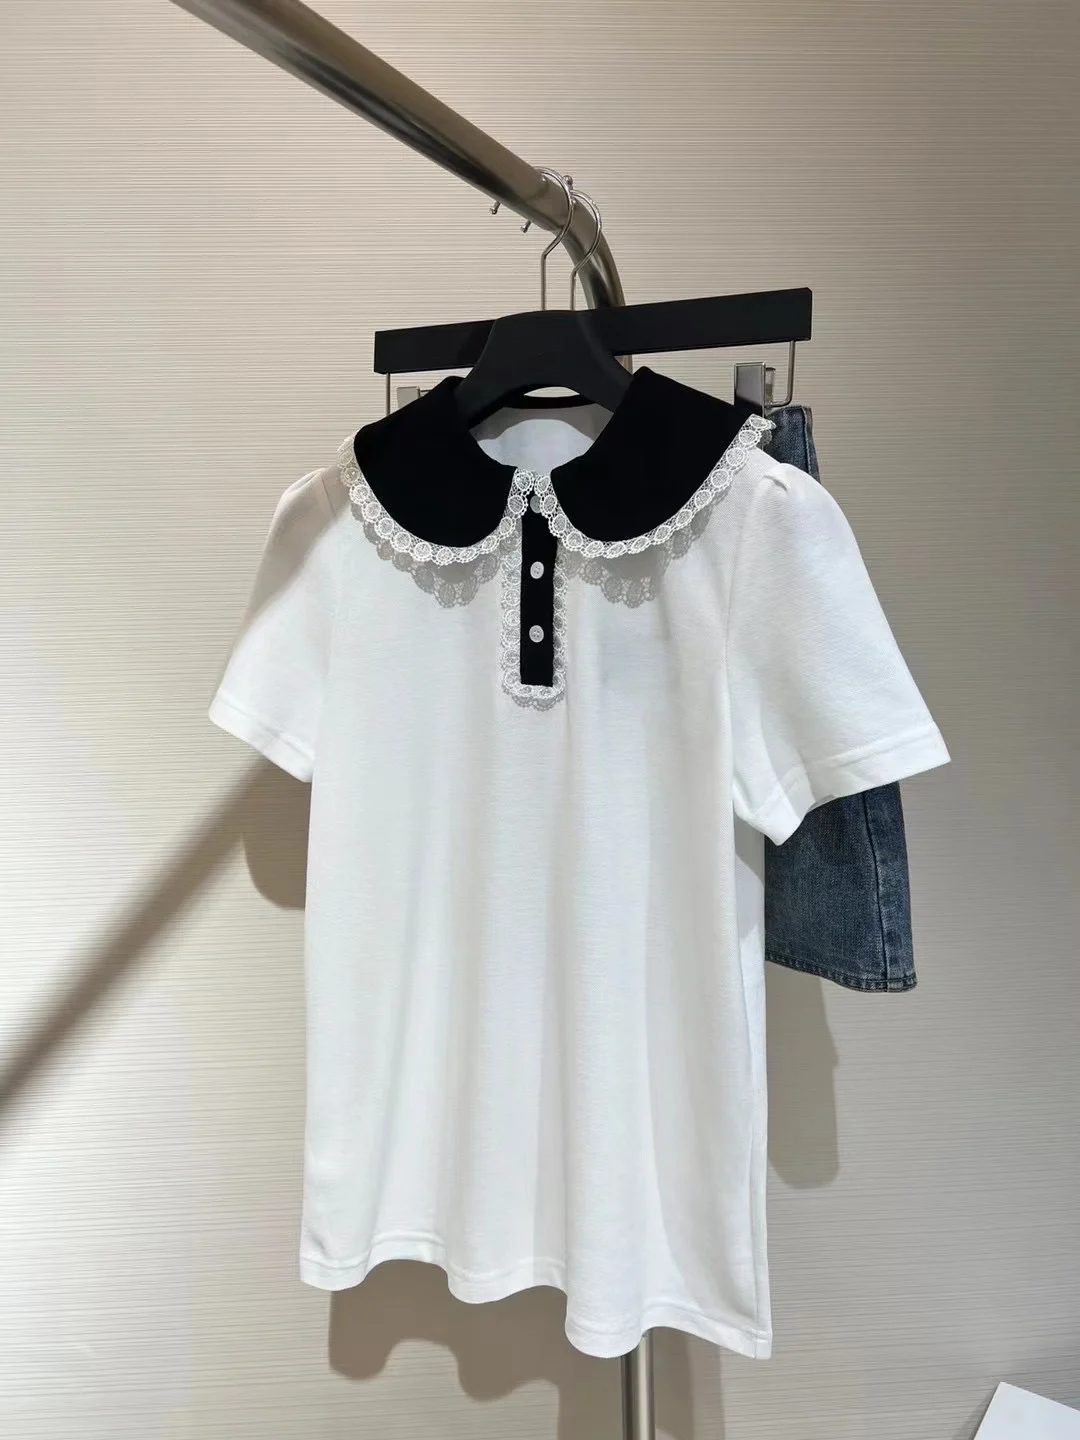 Simple neck white top, small loose shirt version with elastic shorts look slim and versatile high-grade7.5